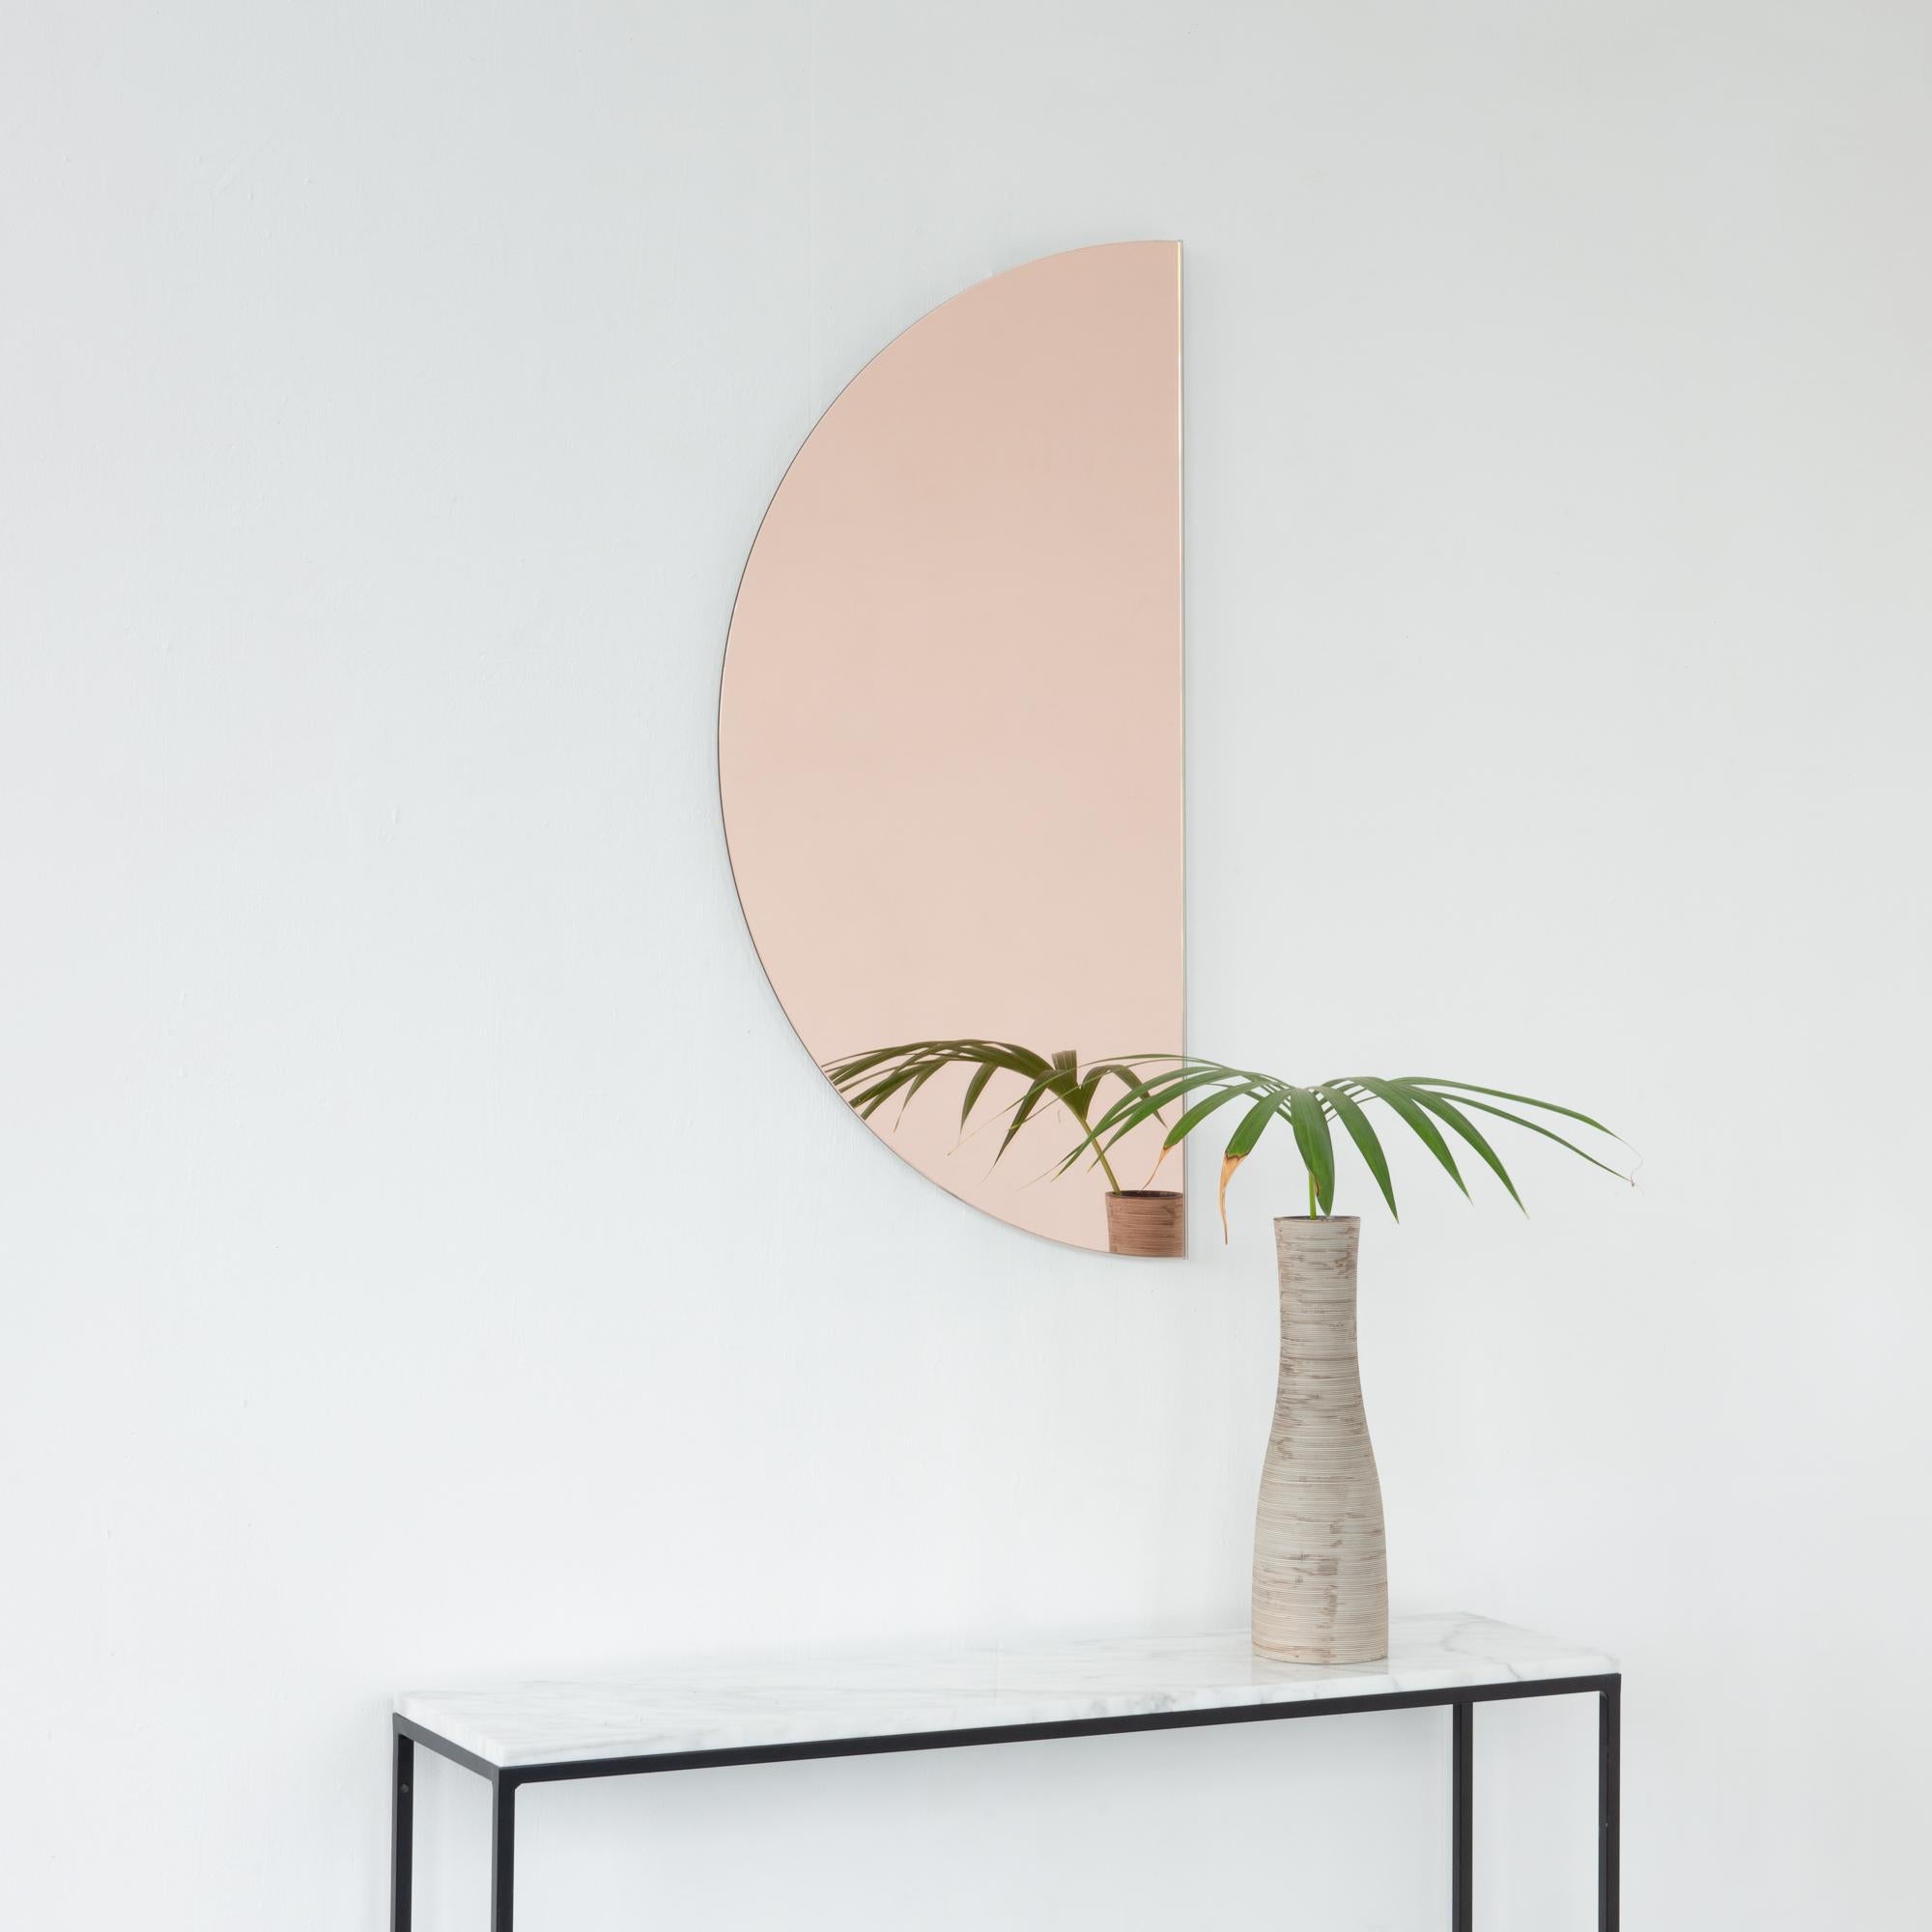 Minimalist Luna™ half-moon rose gold (peach) tinted frameless mirror with a floating effect. Fitted with a quality hanging system for a flexible installation in 4 different directions. Designed and made in London, UK. 

Our mirrors are designed with